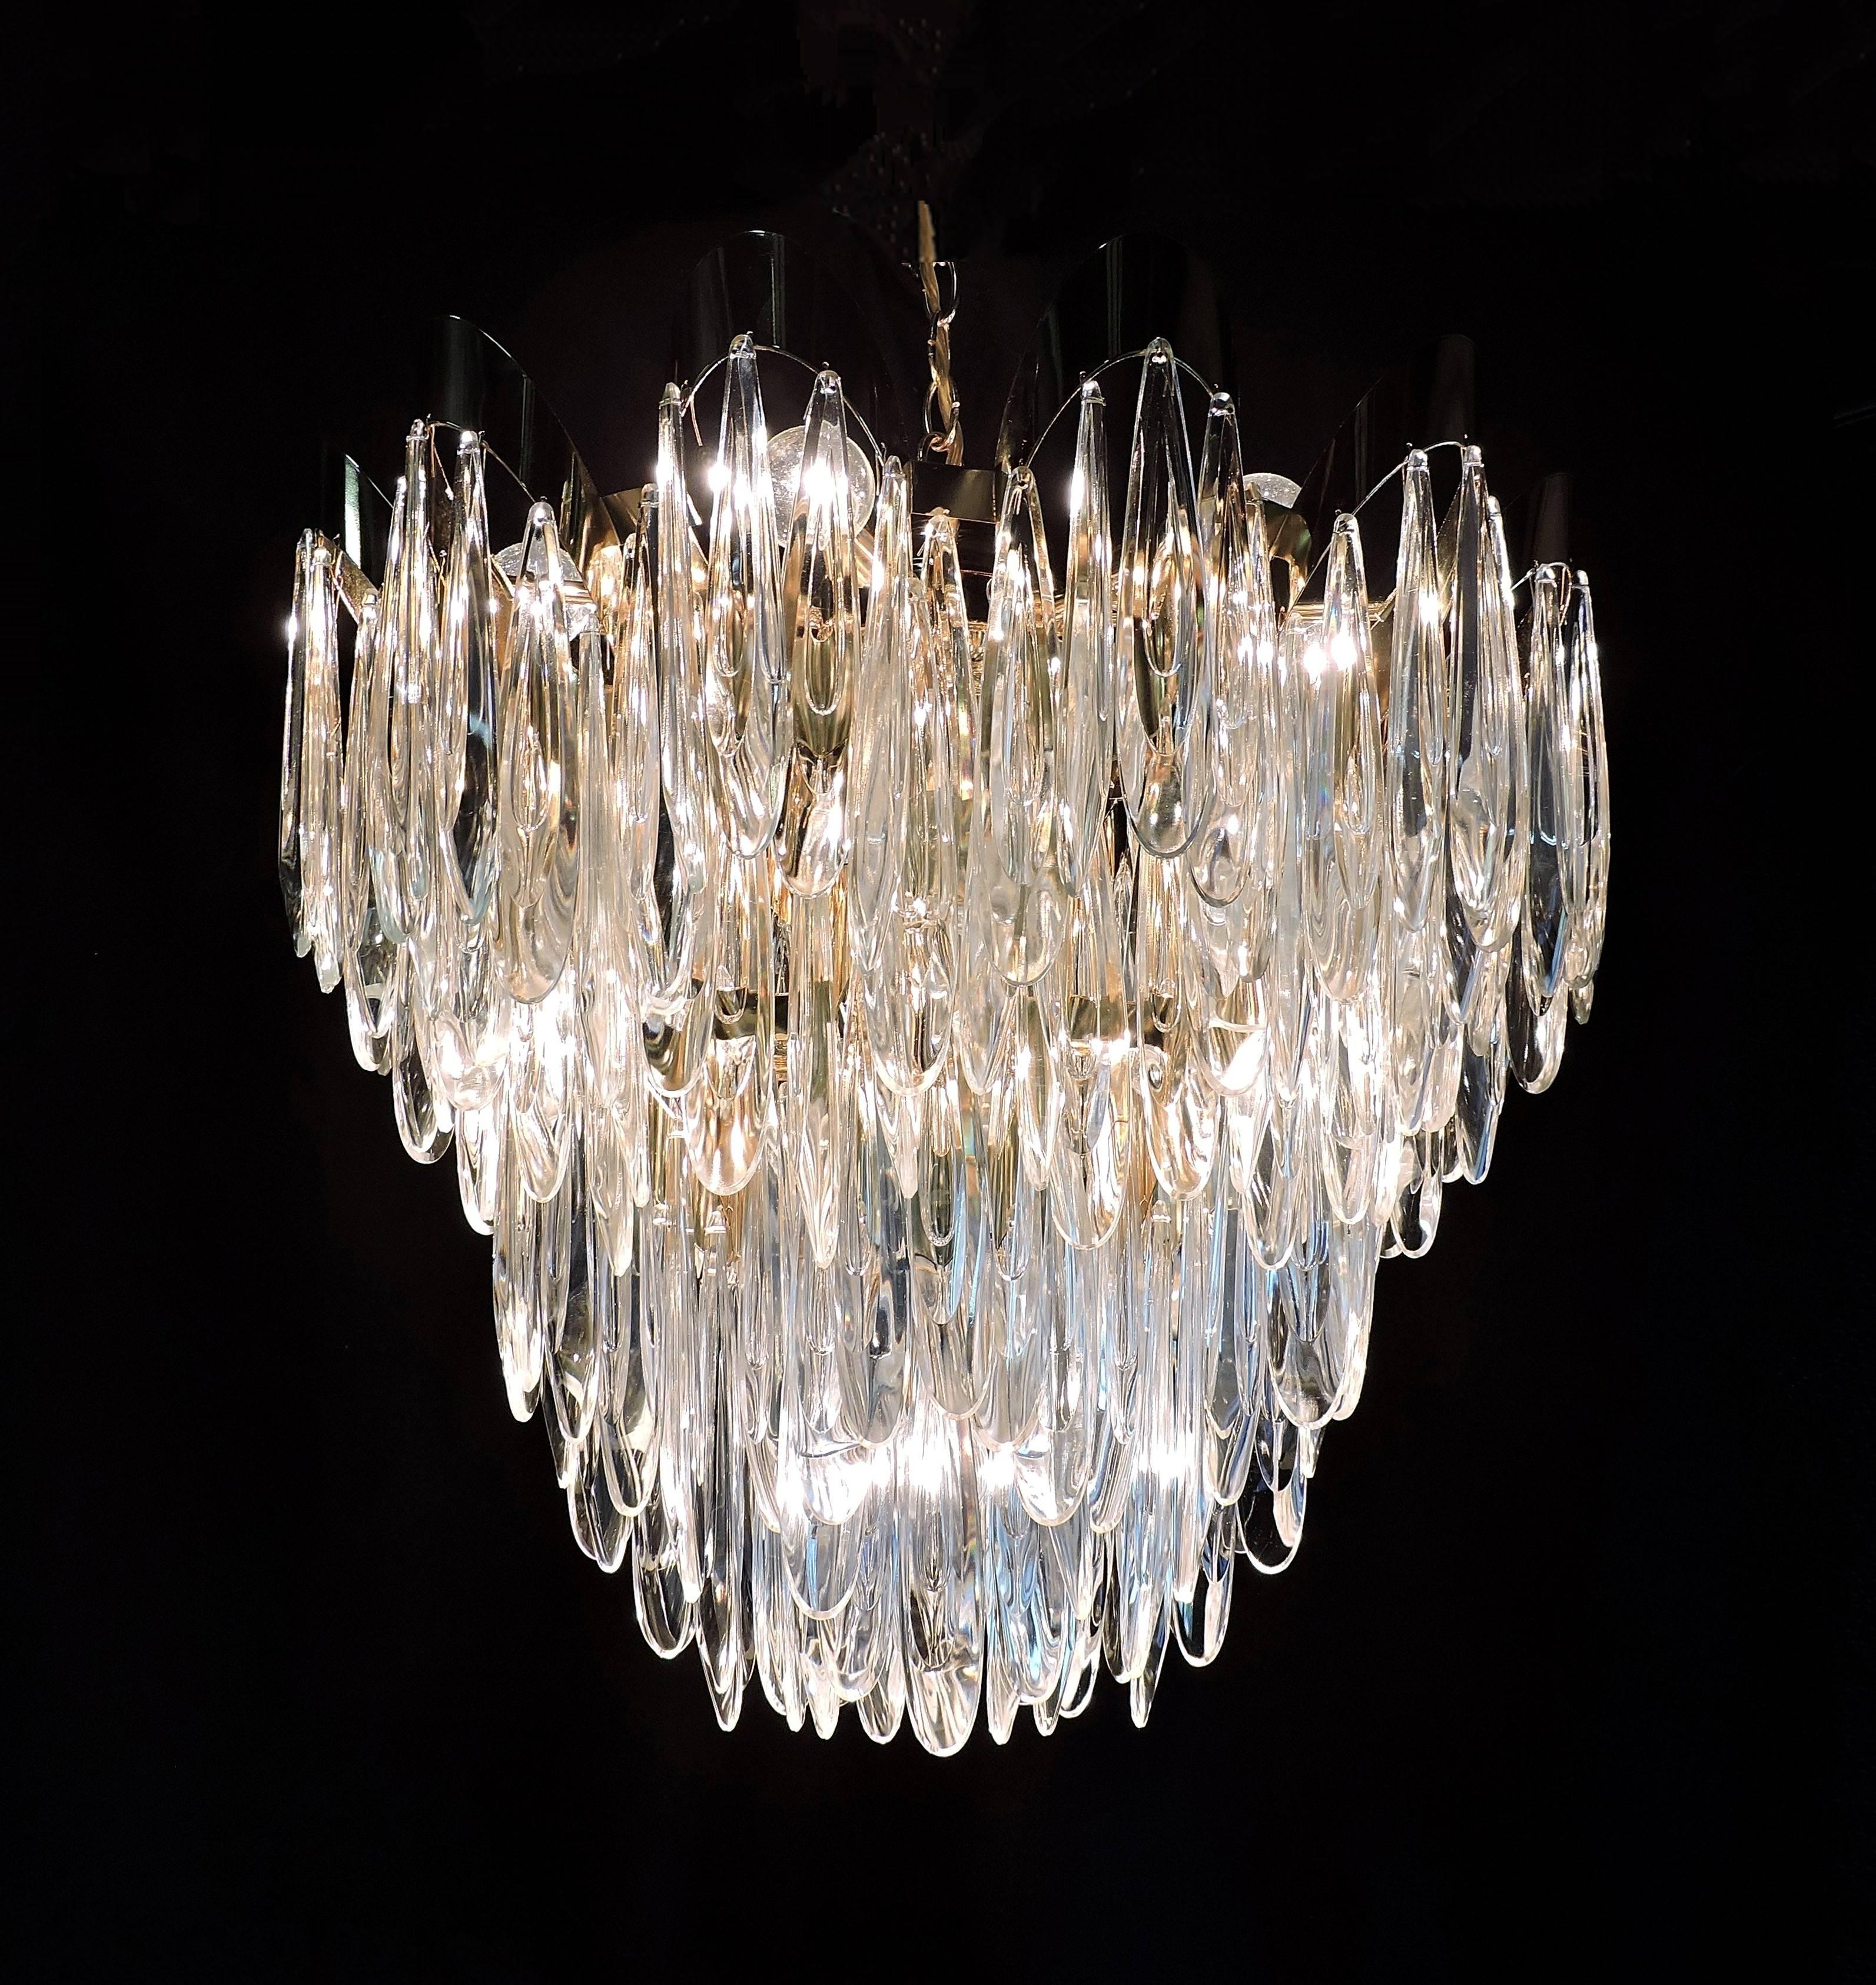 Lush and elegant chandelier by Lobmeyr. This large chandelier has over 200 tear drop shaped optical crystals that hang on a scalloped framework. Stunning in person.